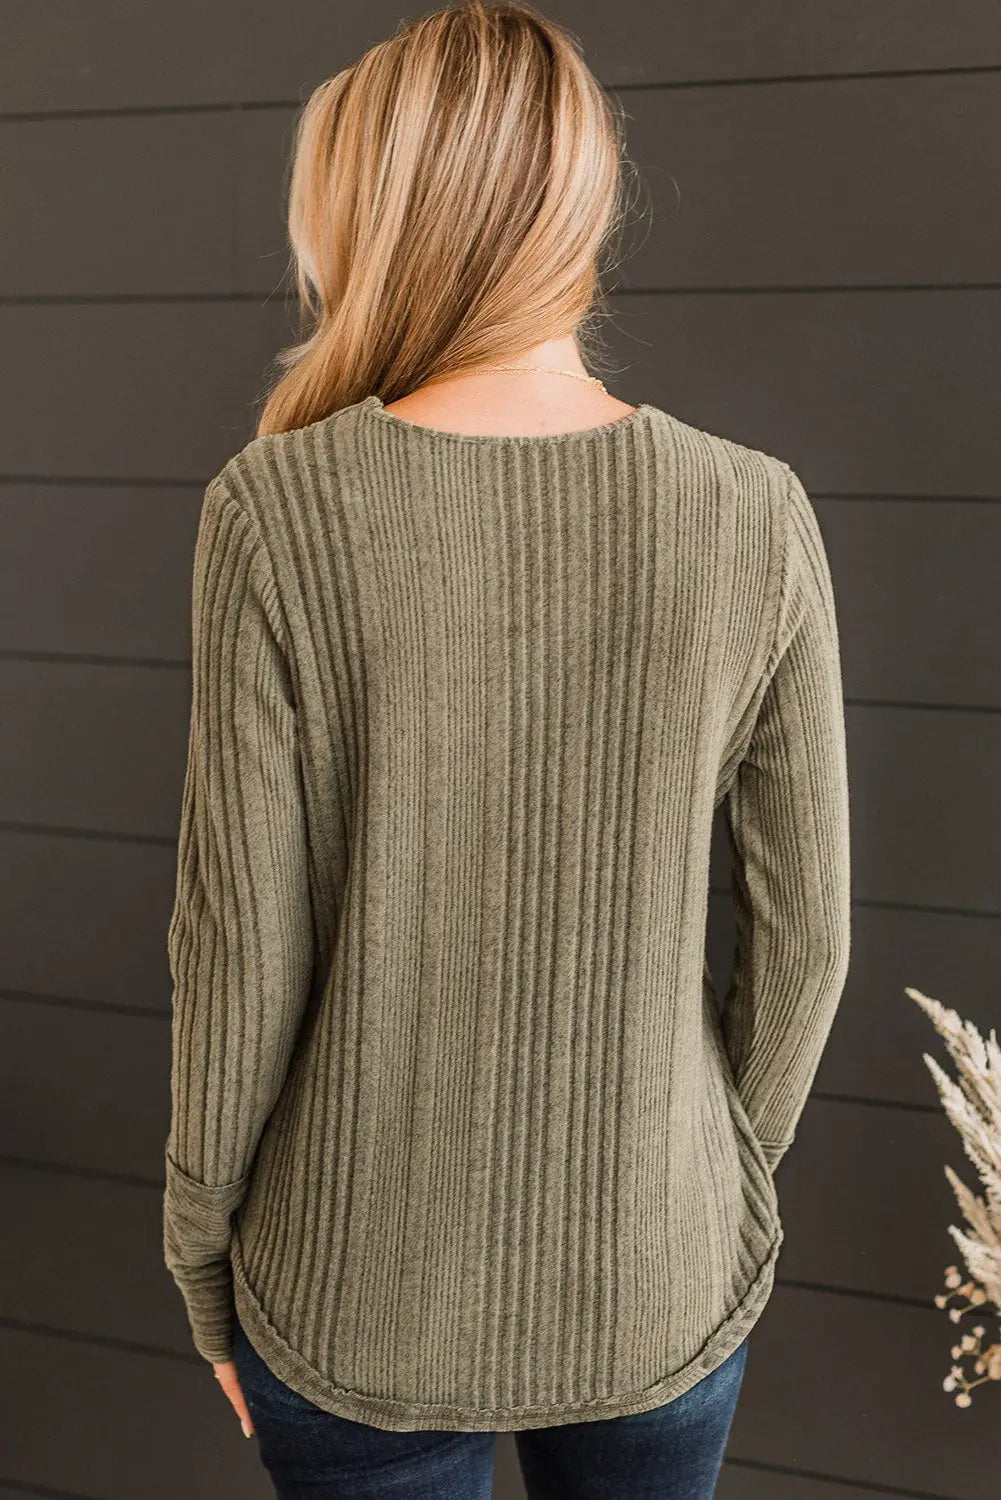 Jungle green v neck buttoned ribbed knit top - long sleeve tops